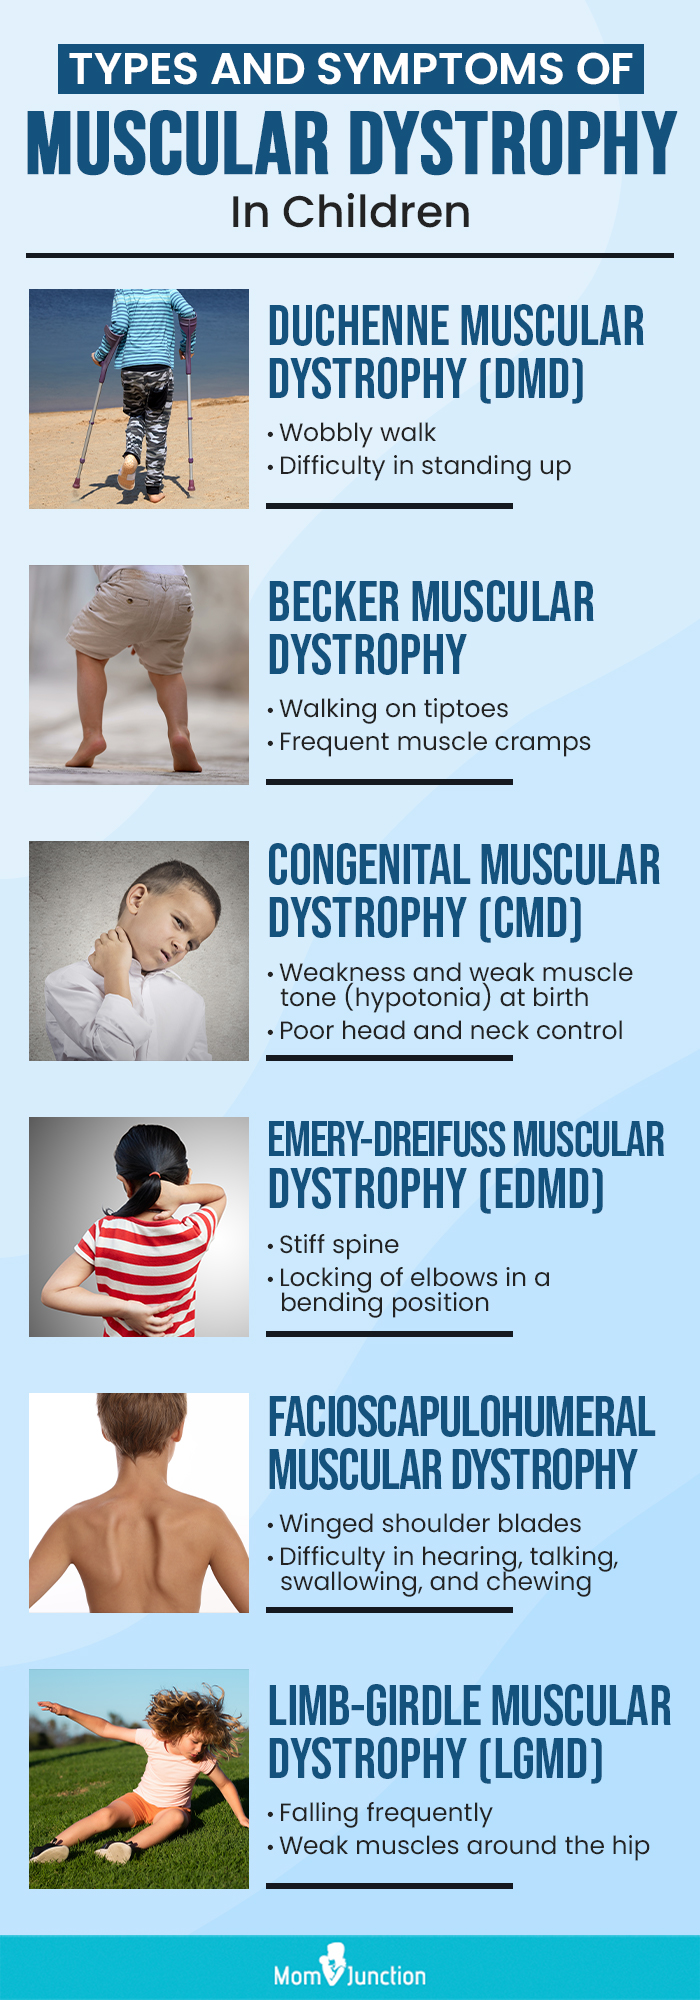 types and symptoms of muscular dystrophy in children (infographic)